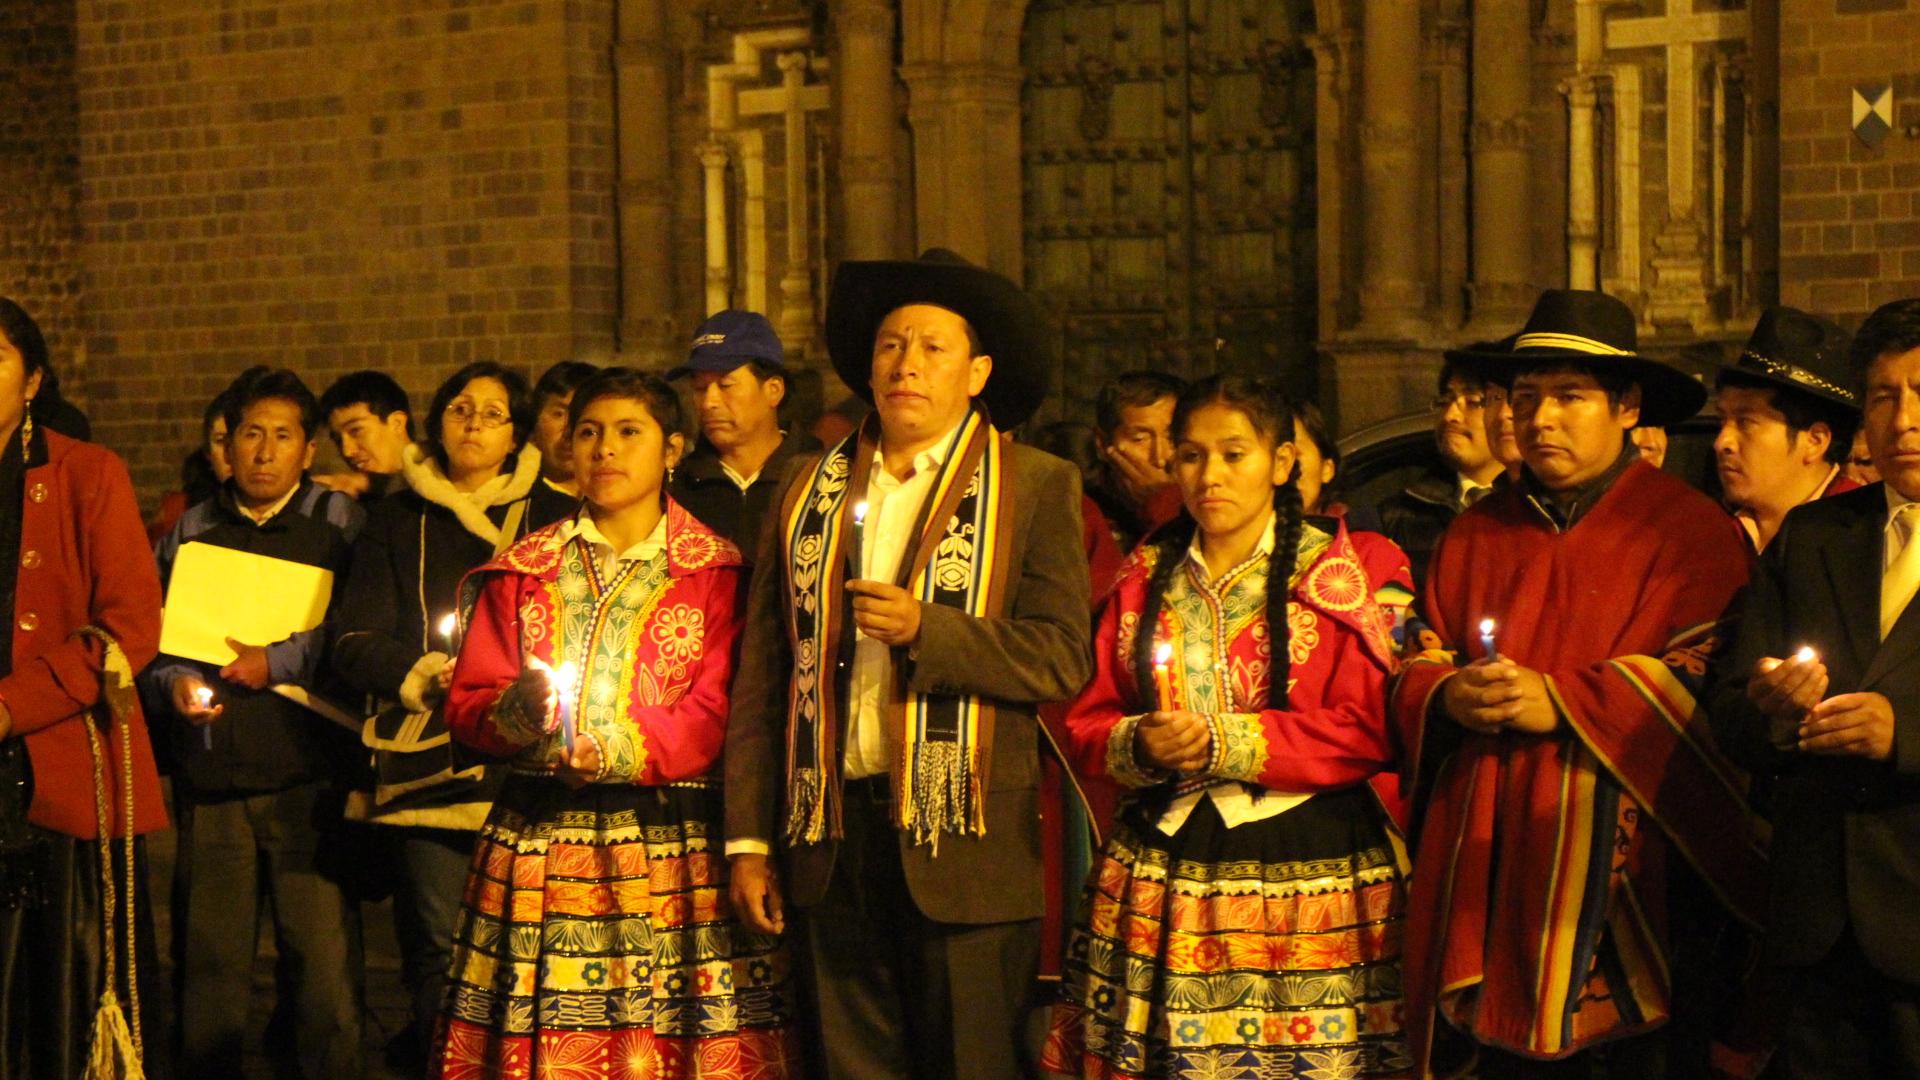 A group of indigenous mayors, historians and activists gather for a candlelight vigil in Cuzco's main square to commemorate the 235th anniversary of freedom fighter Tupac Amaru{s death, who was dismembered by Spanish colonists on the square.